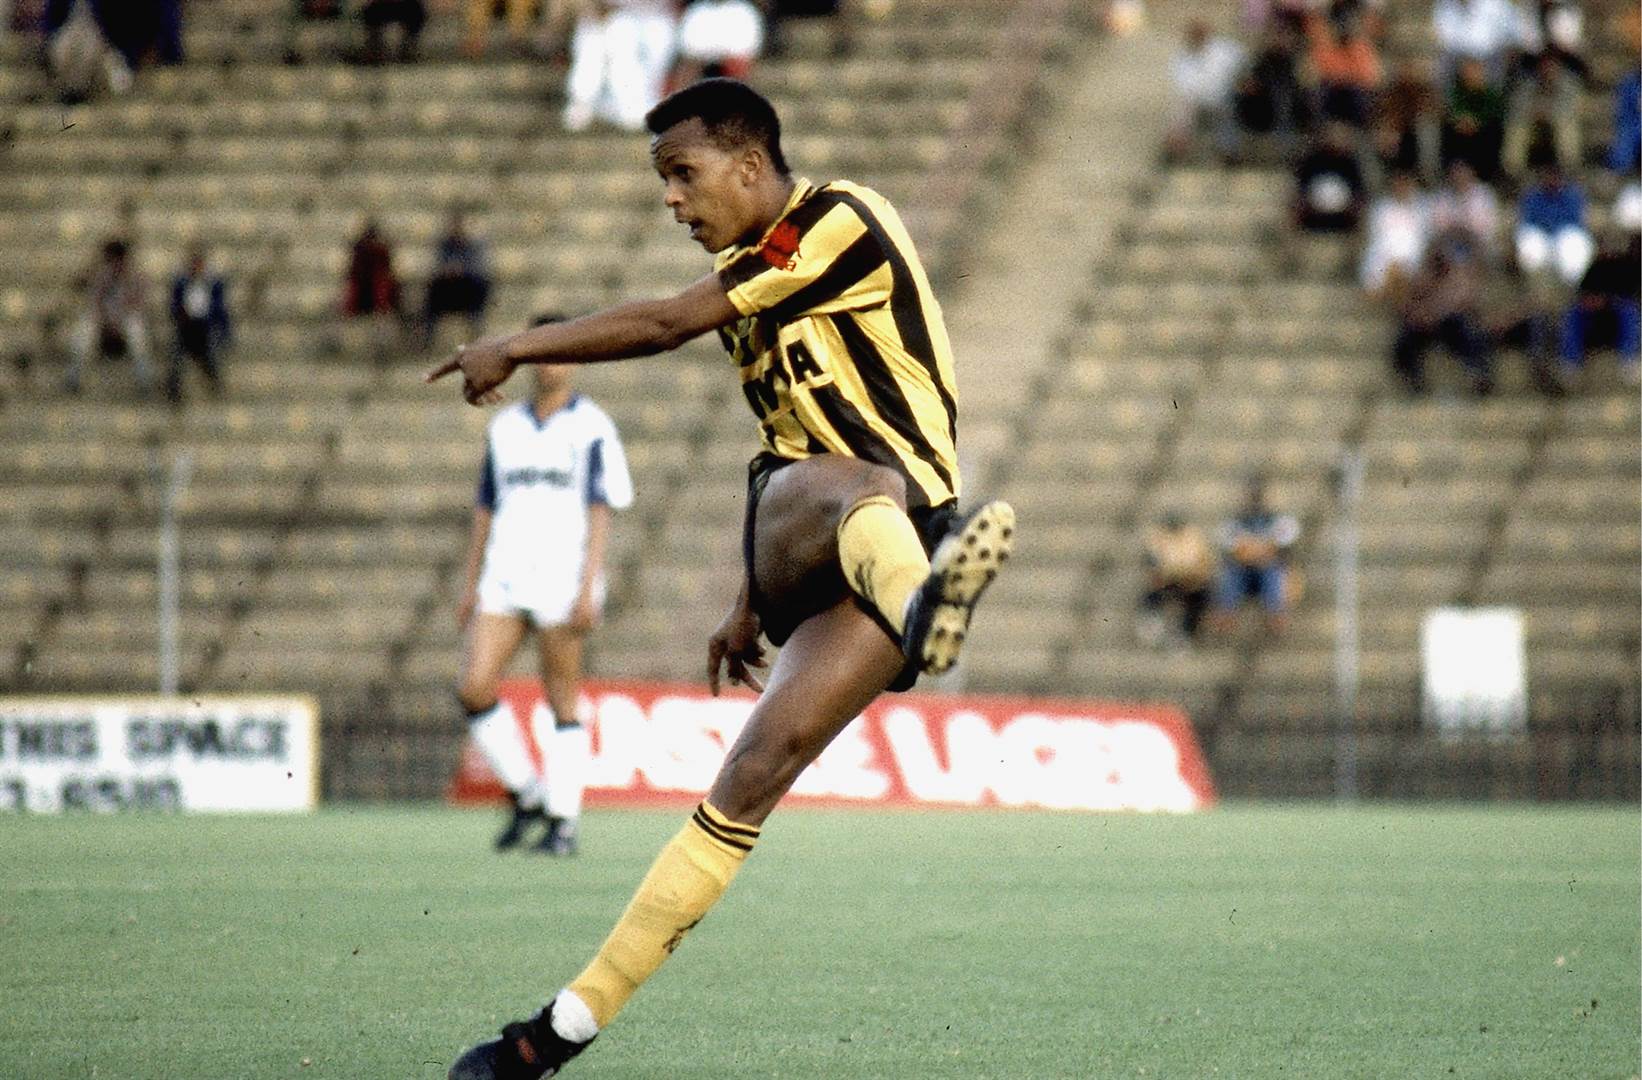 7) RW - Doctor Khumalo: He was more penetrating on